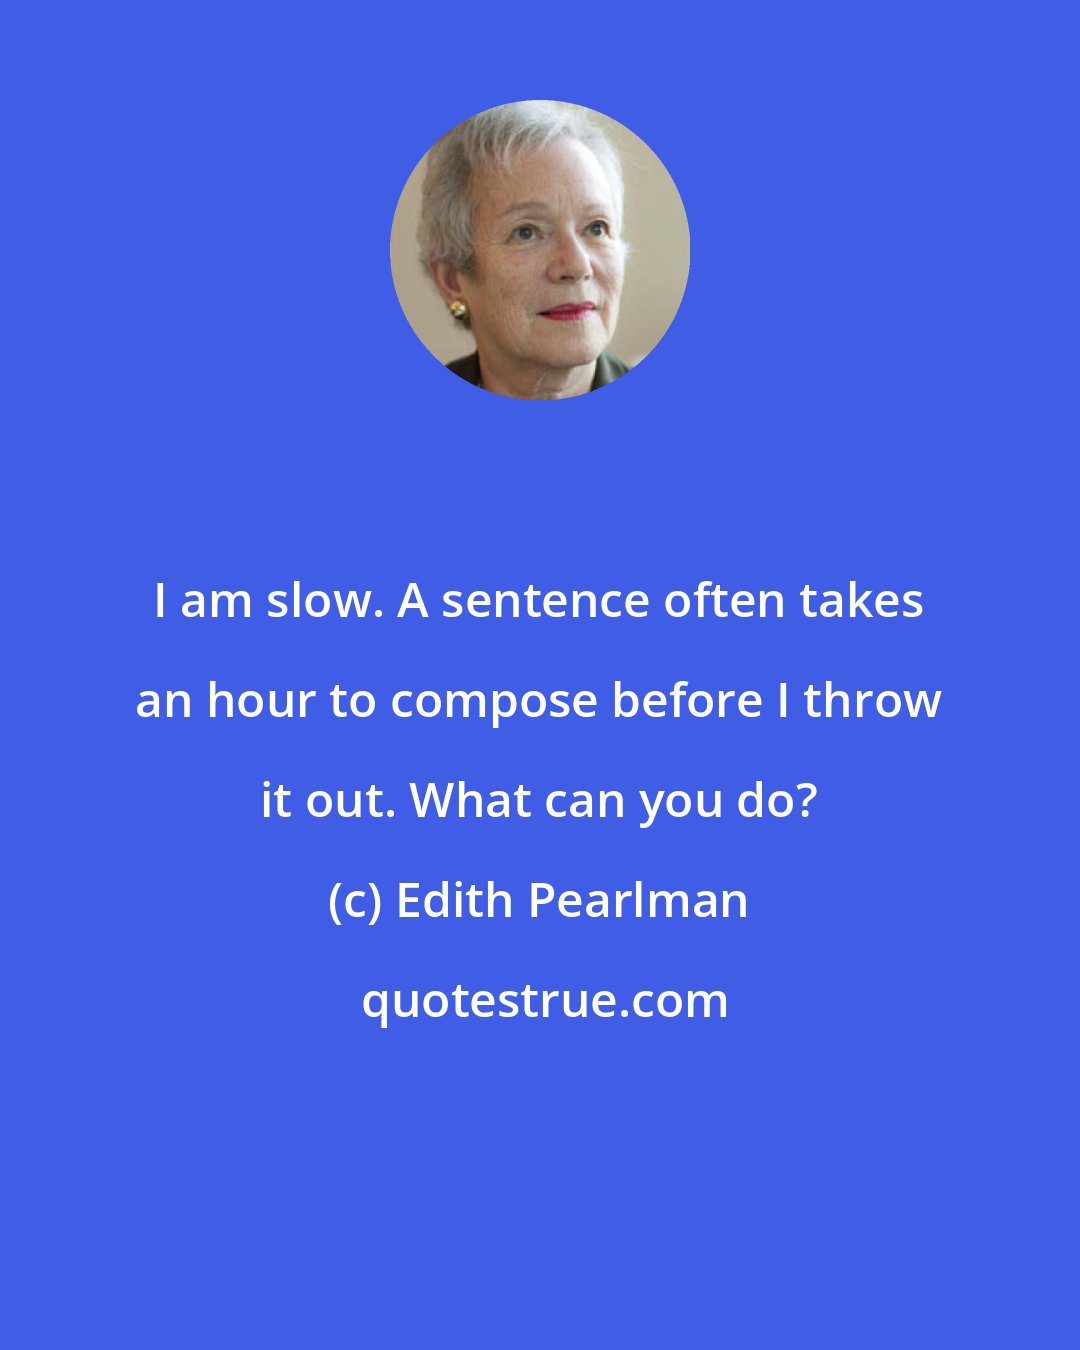 Edith Pearlman: I am slow. A sentence often takes an hour to compose before I throw it out. What can you do?